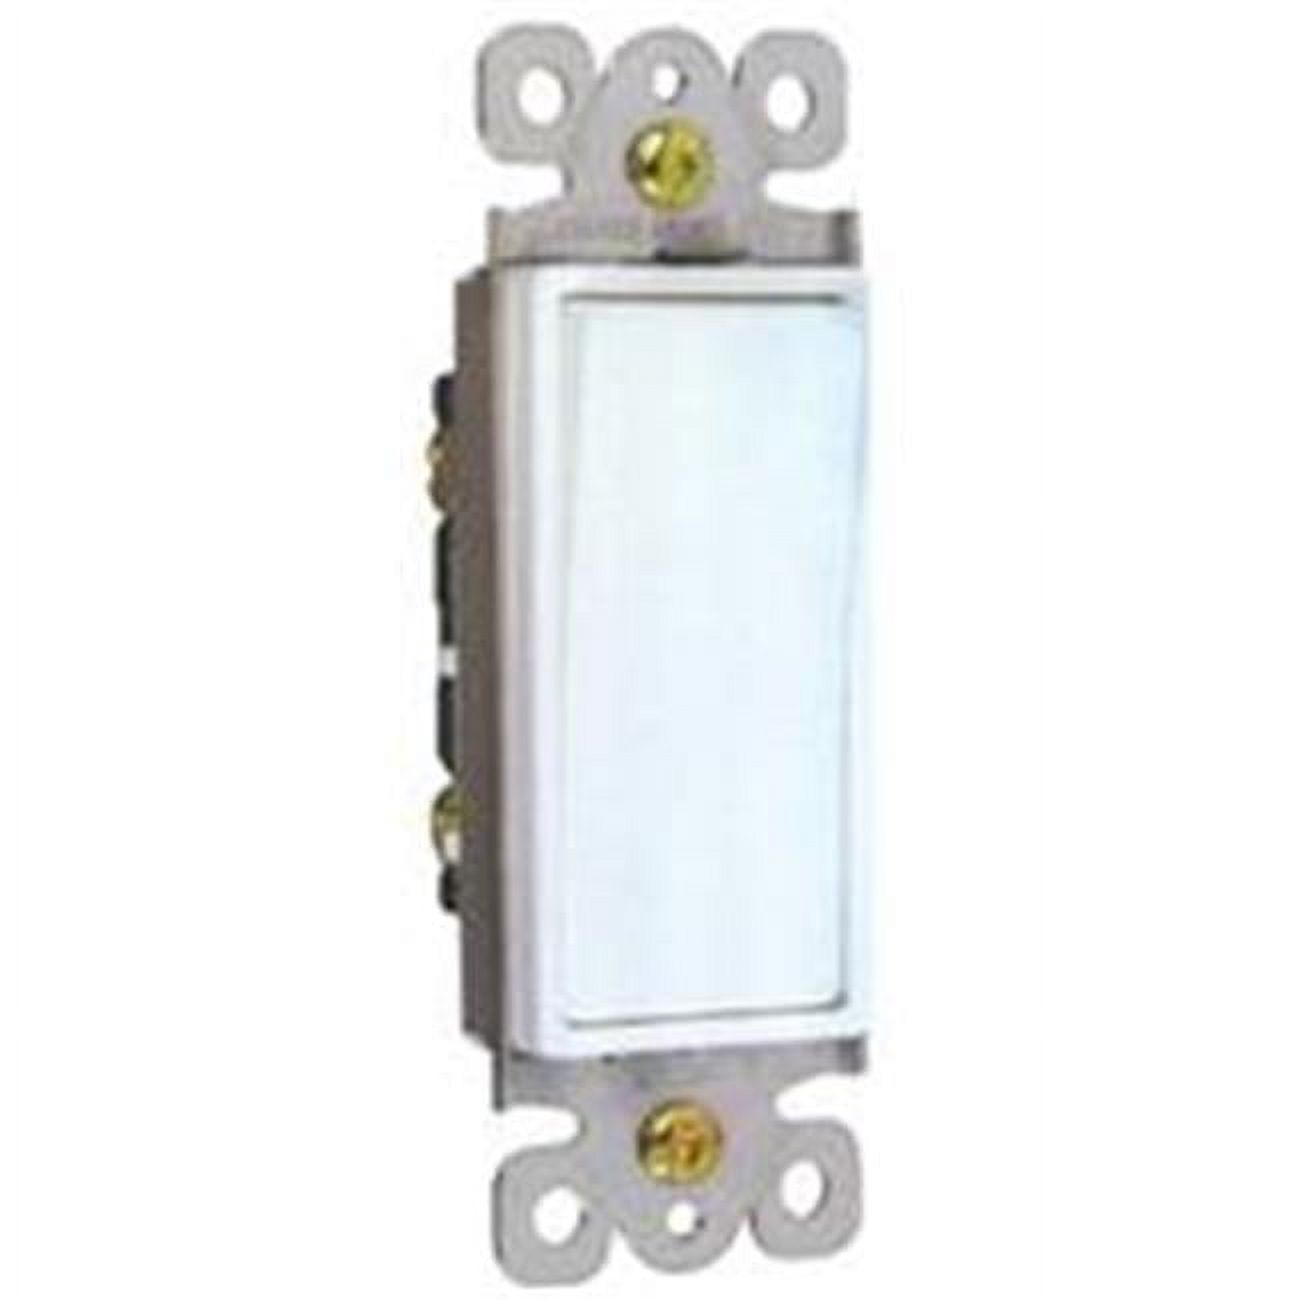 Morris Products 82051 Decorator Switches White Single Pole 15A-120 - 277V - image 1 of 2